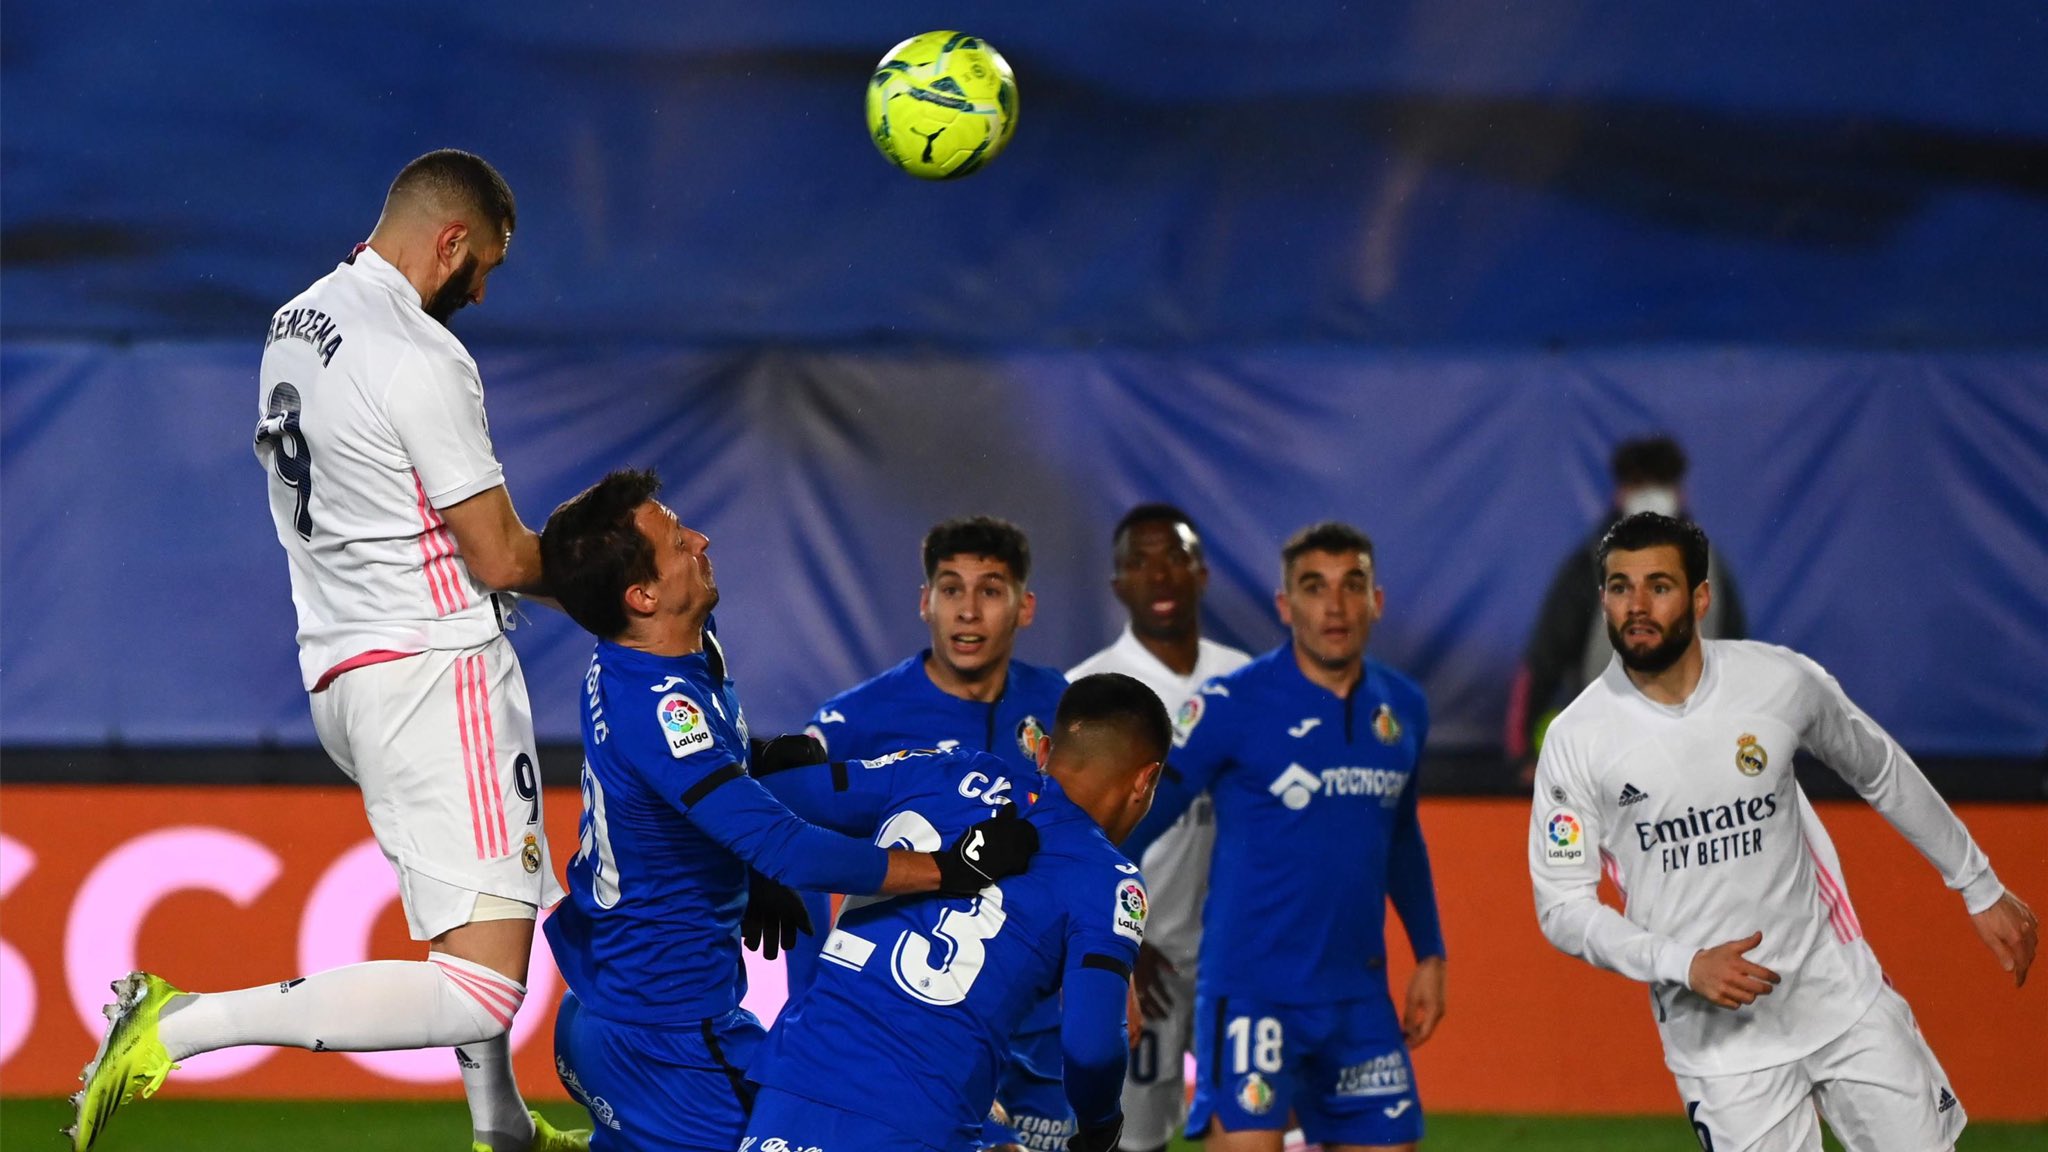 Watch: Karim Benzema gives Real Madrid the lead against Getafe